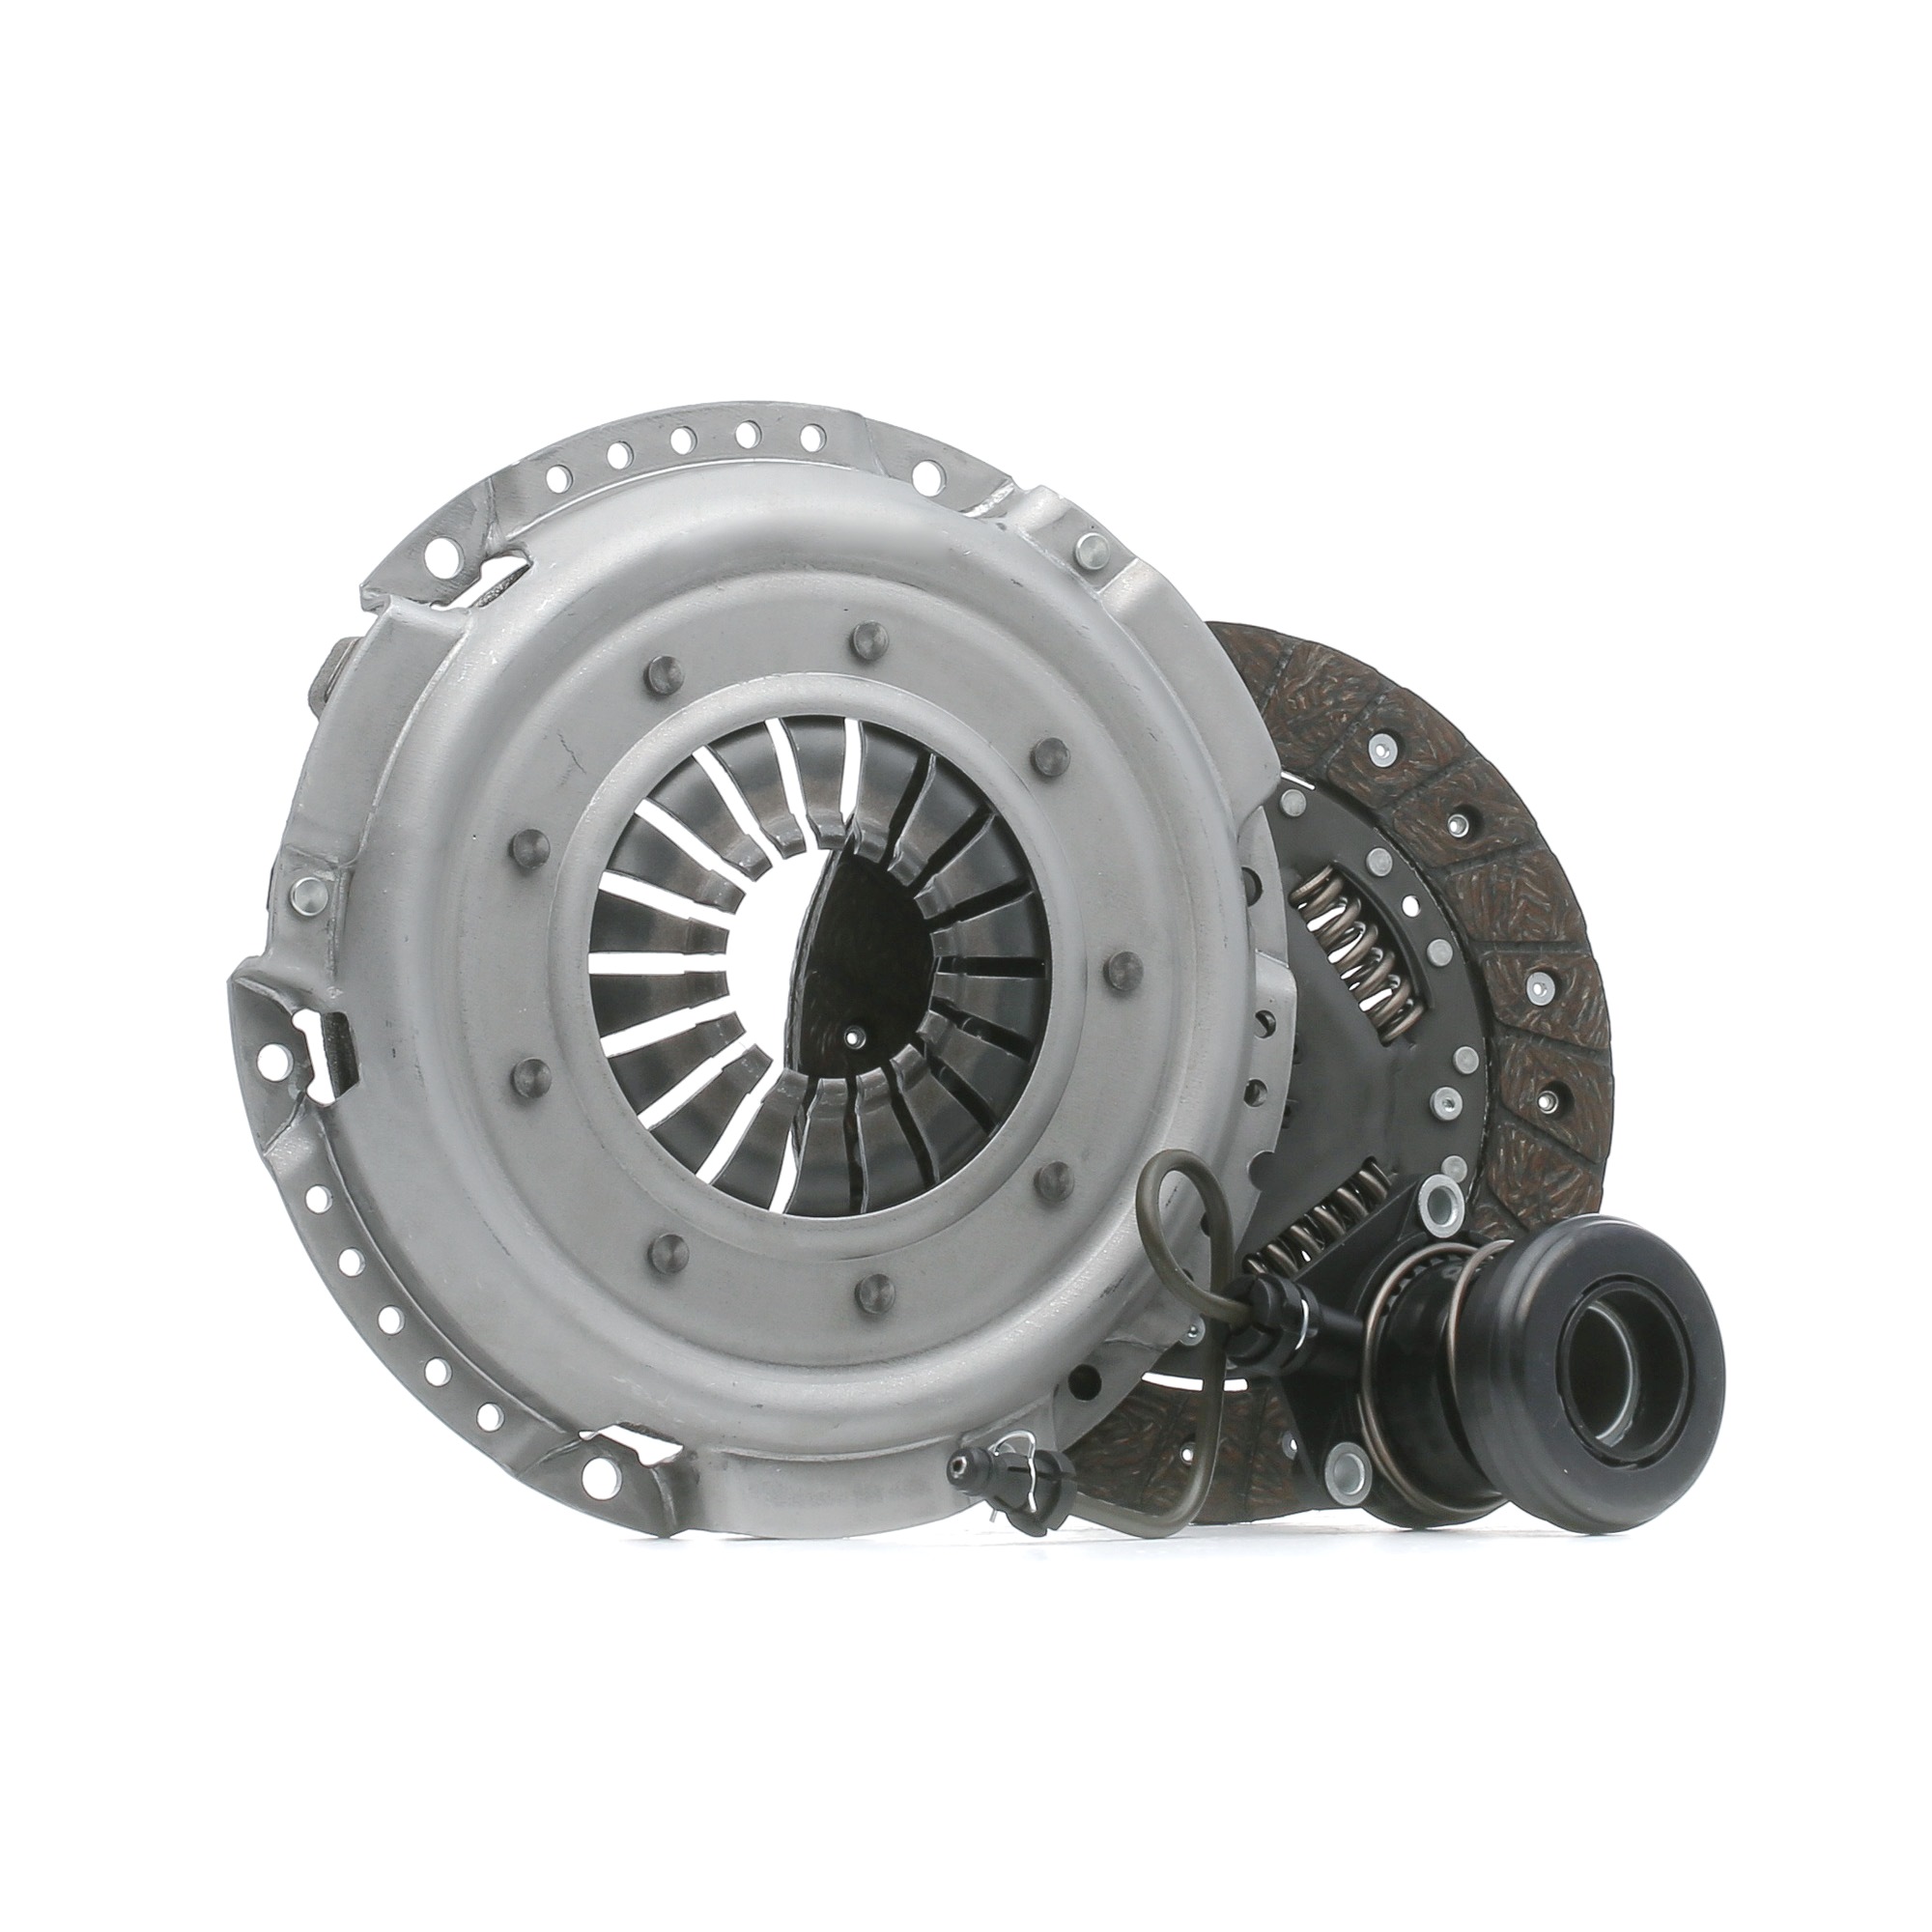 STARK SKCK-0100483 Clutch kit three-piece, with central slave cylinder, with clutch pressure plate, with clutch disc, 200mm